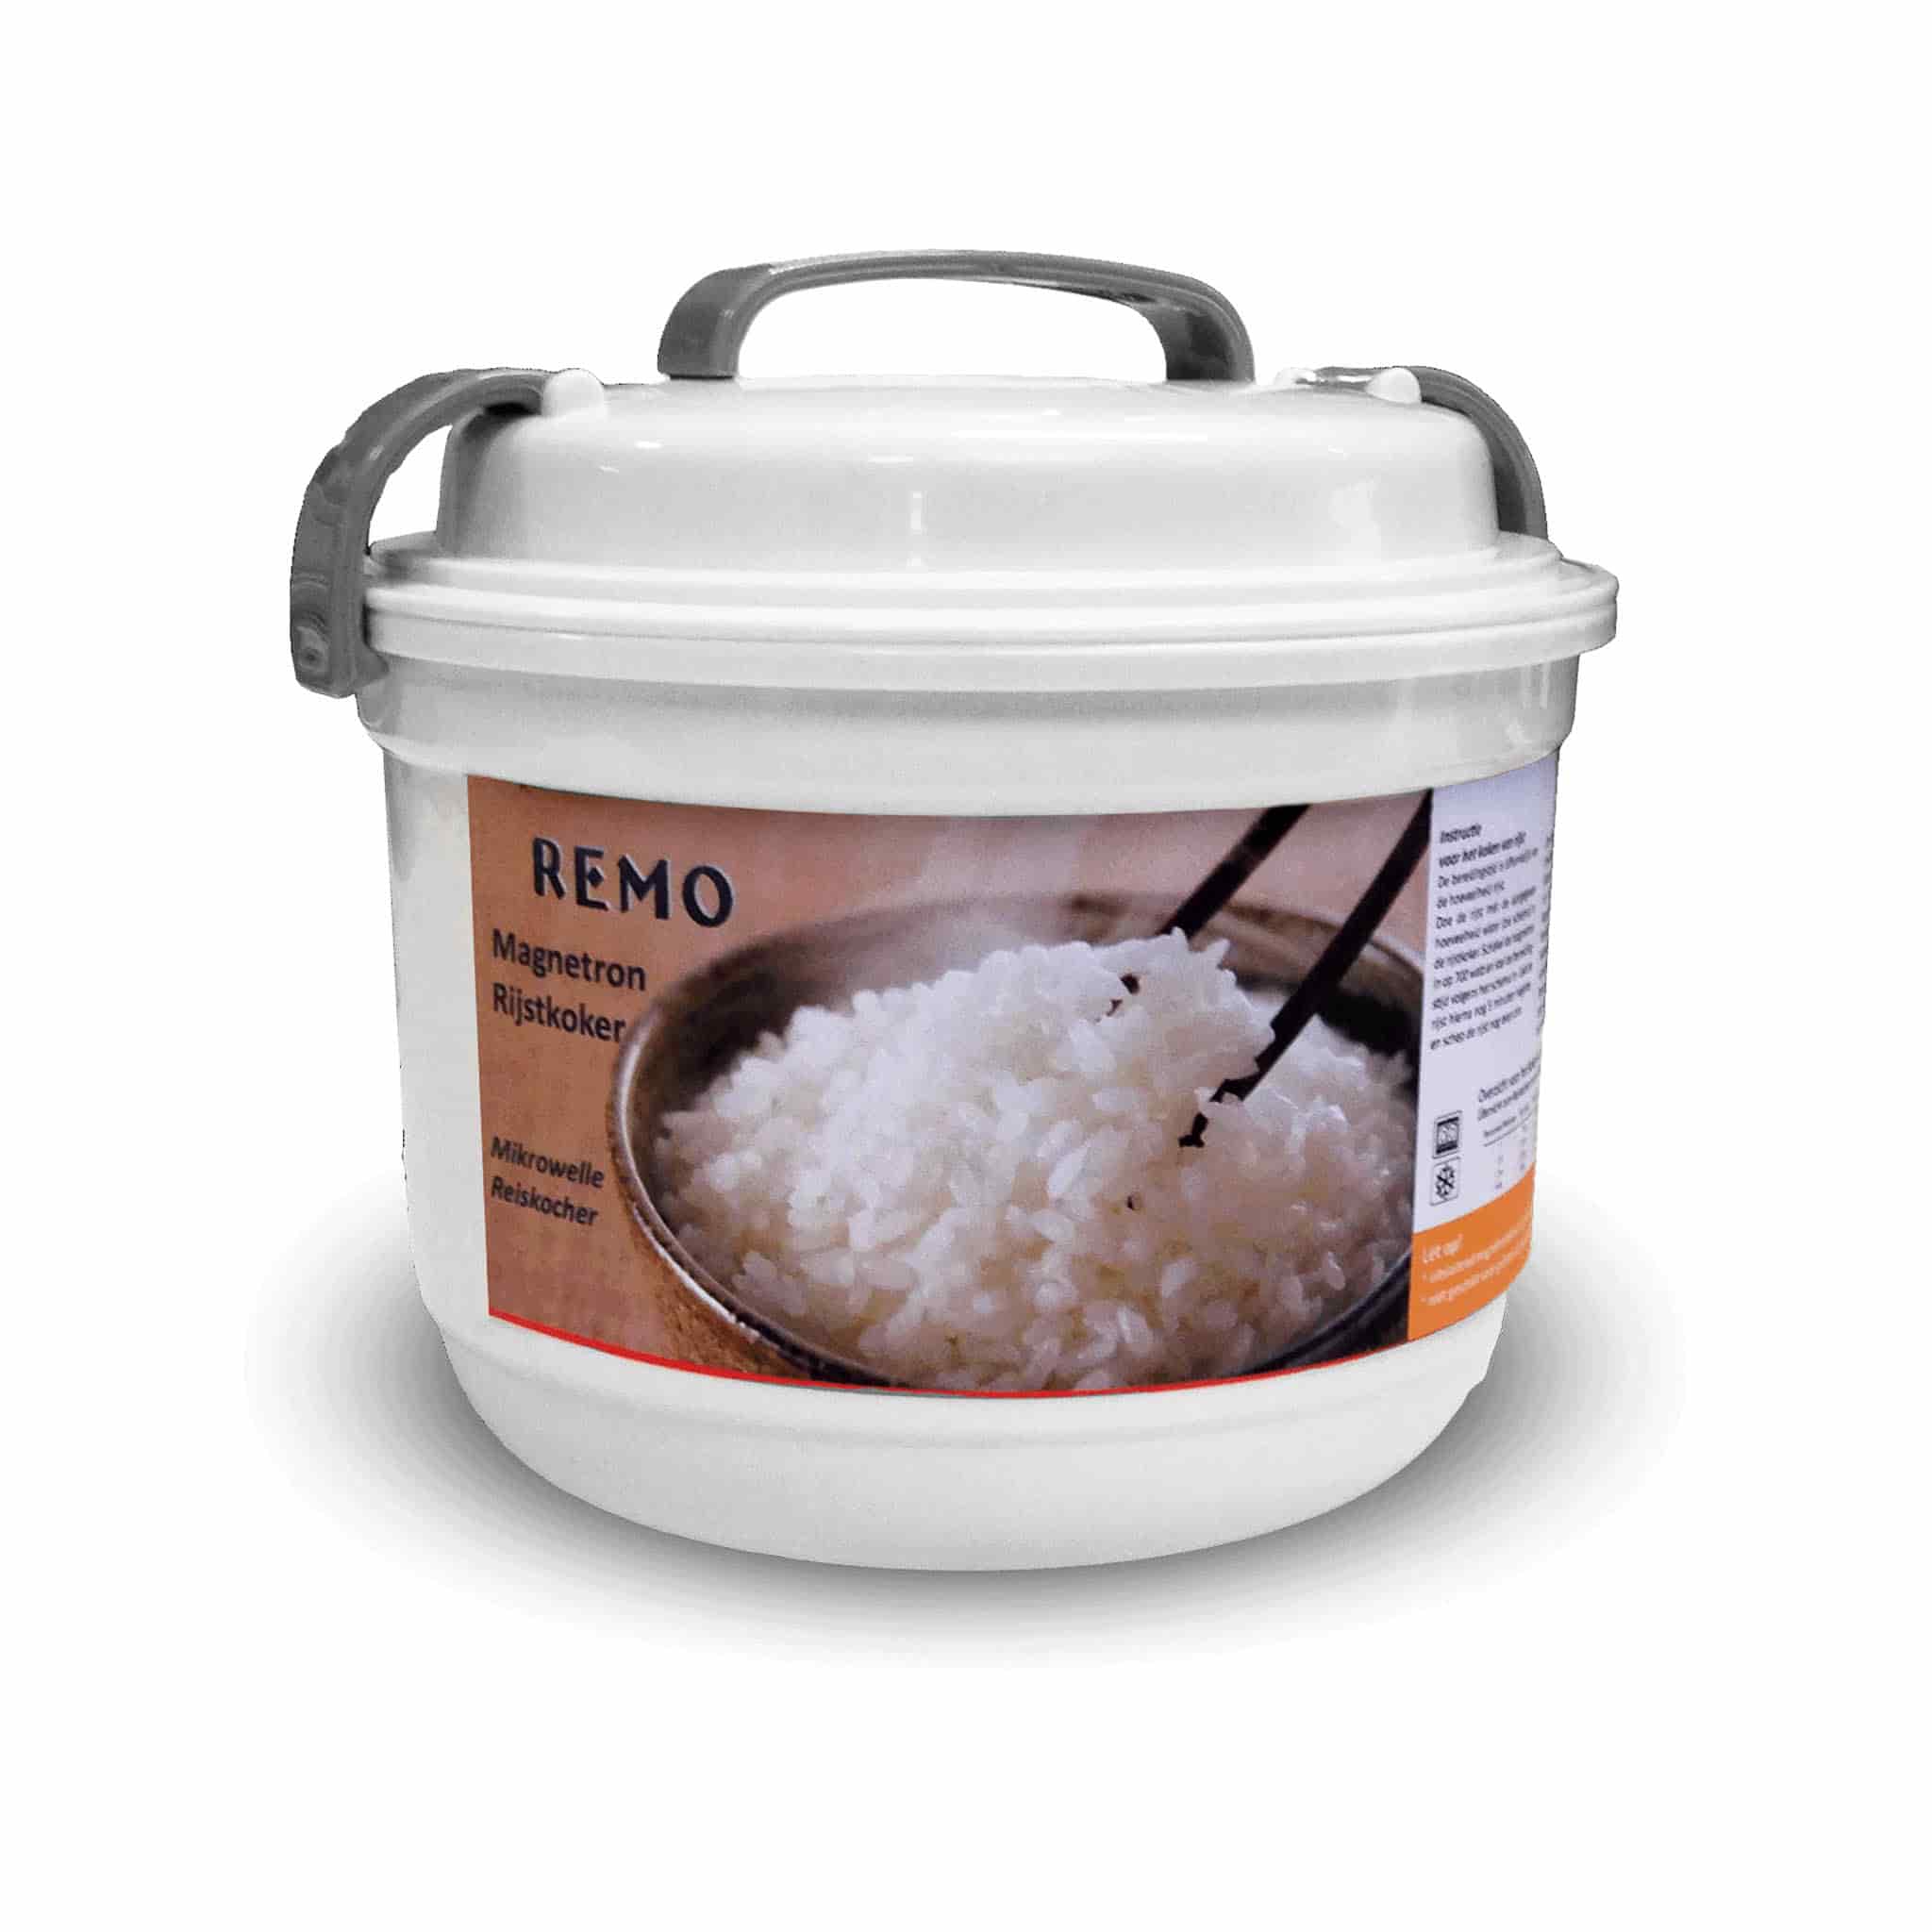 Remo Microwave Rice Cooker